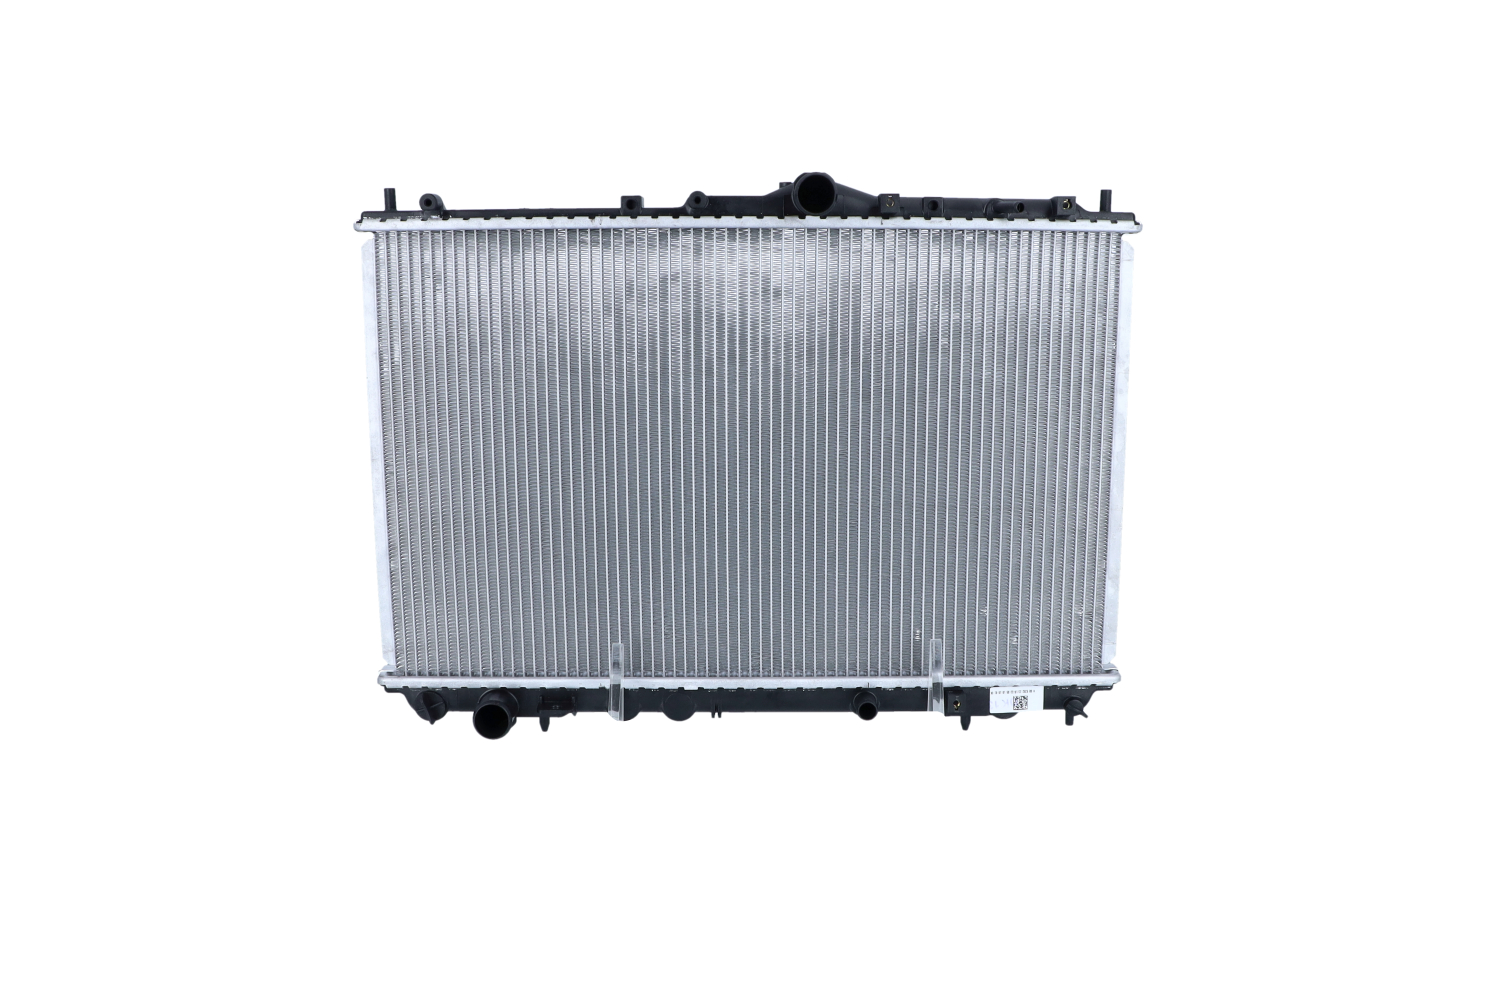 NRF 509517 Engine radiator Aluminium, 673 x 400 x 20 mm, with mounting parts, Brazed cooling fins